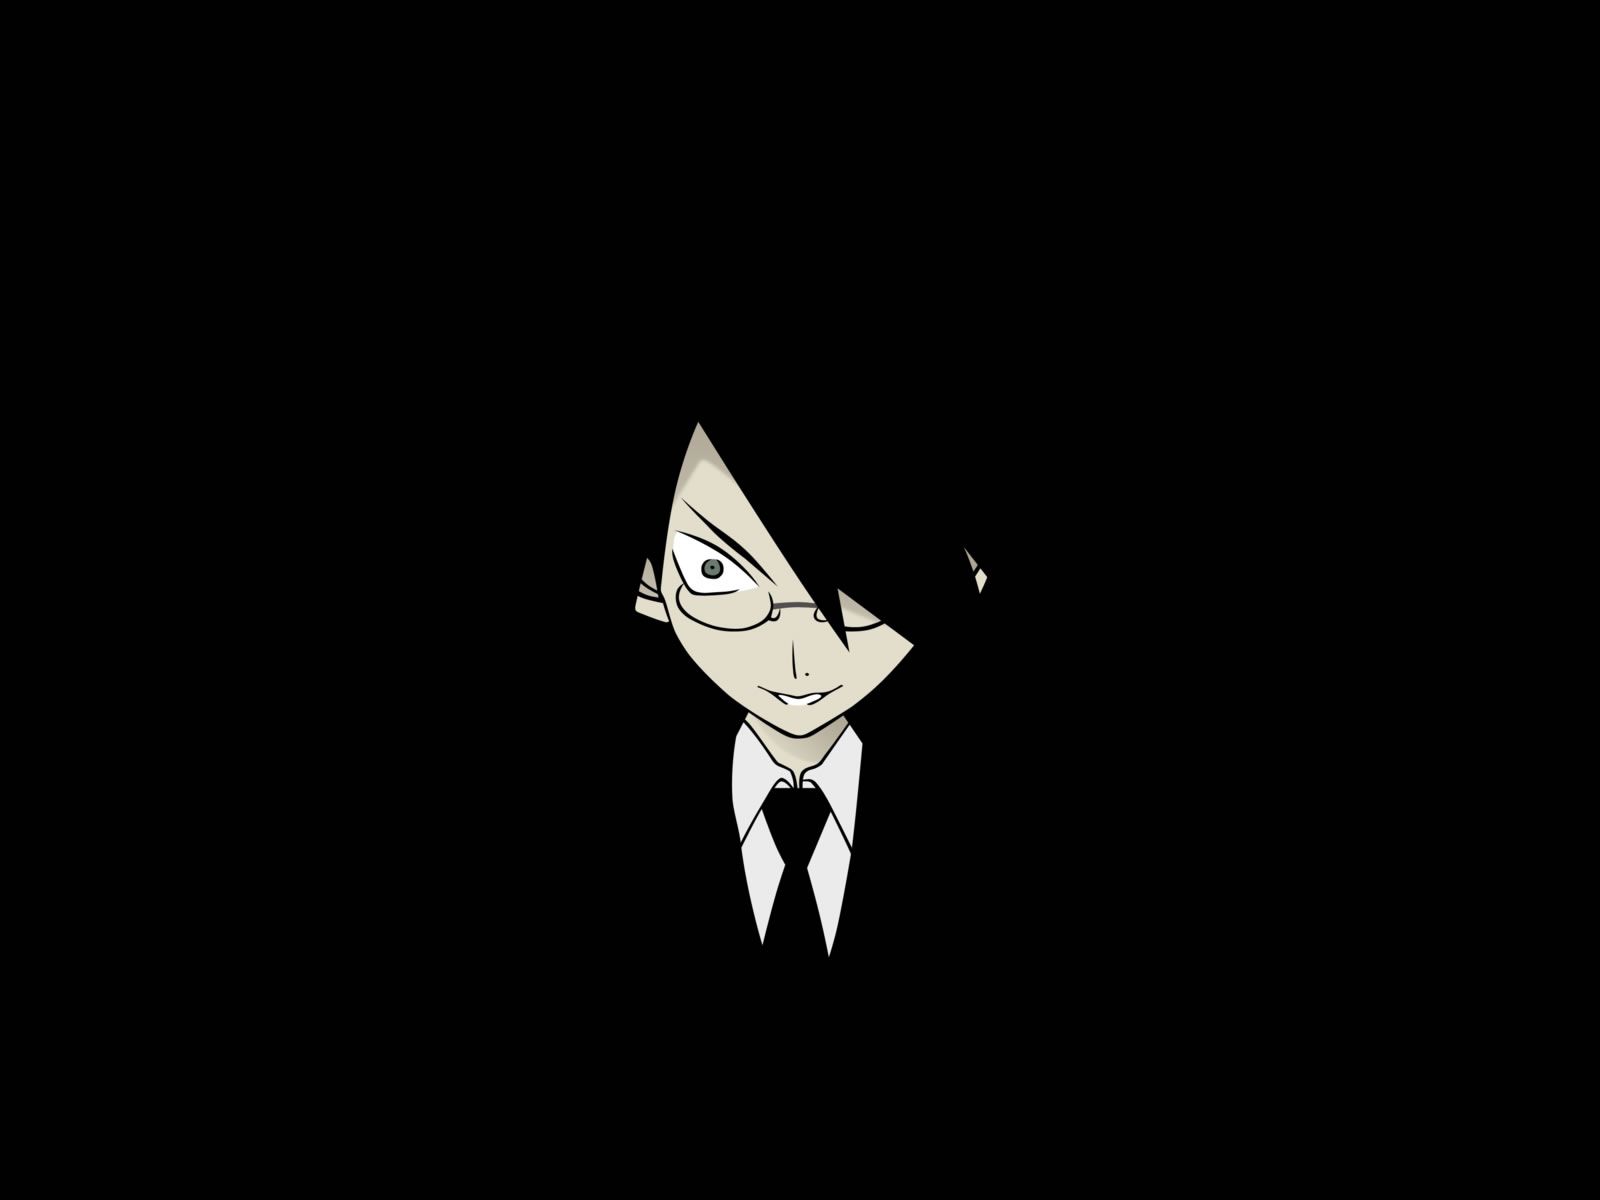 fond-ibex817: Black haired teenager anime boy wearing a suit